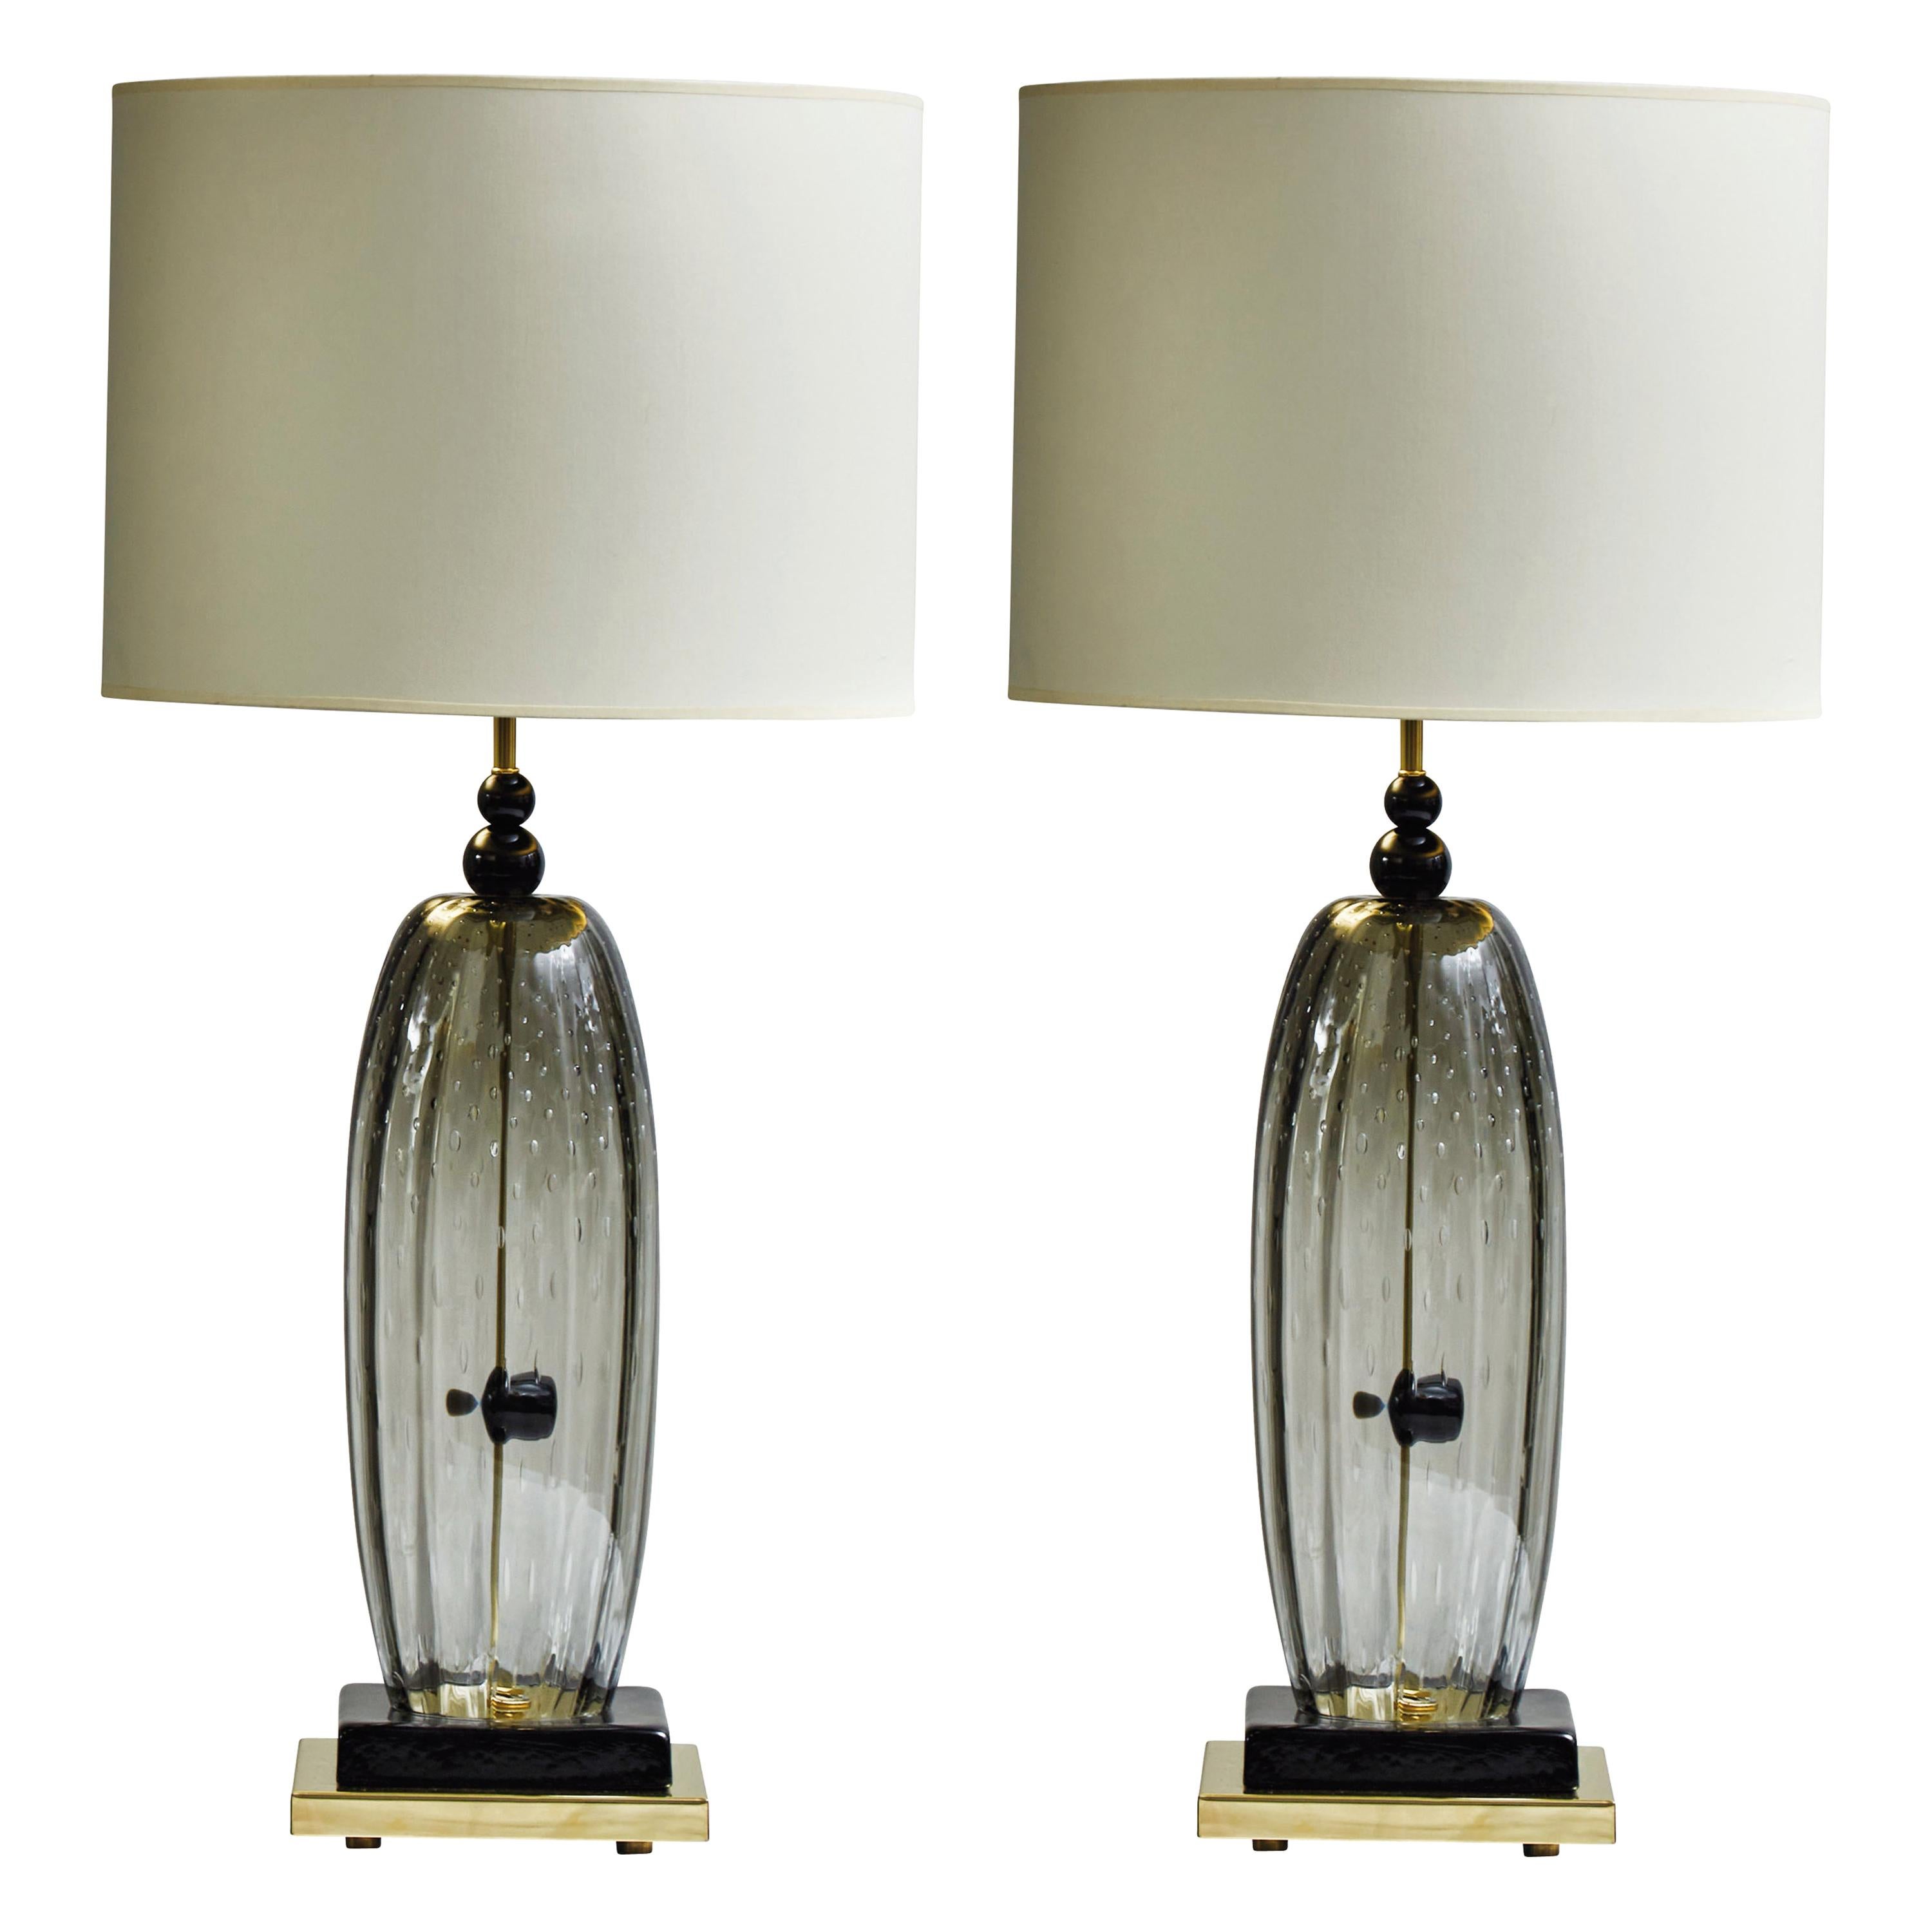 Pair of Brass and Smoked Murano Glass Table Lamps